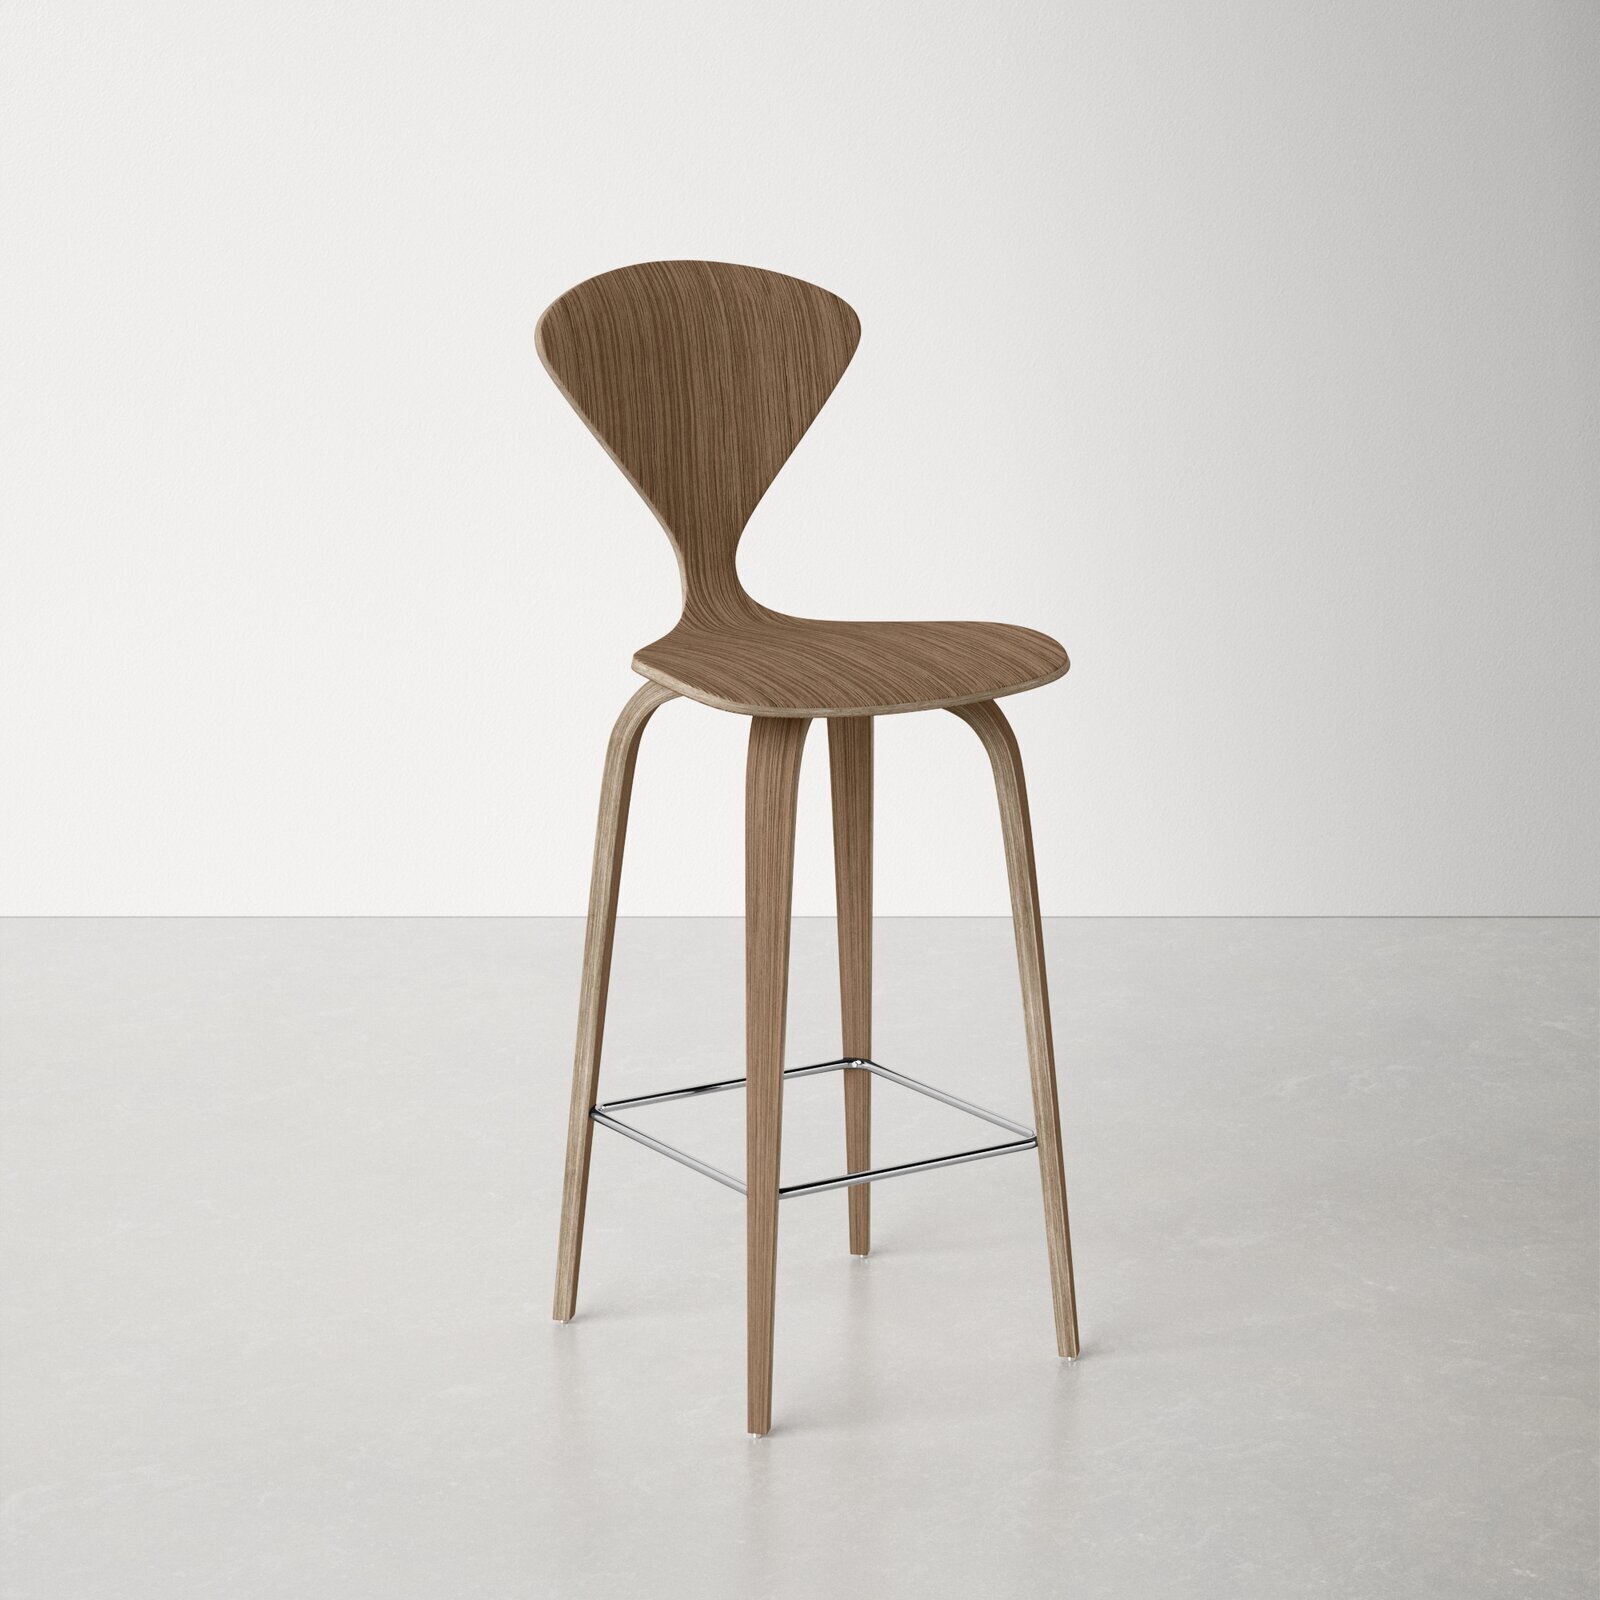 Wooden bar stool with back for modern homes